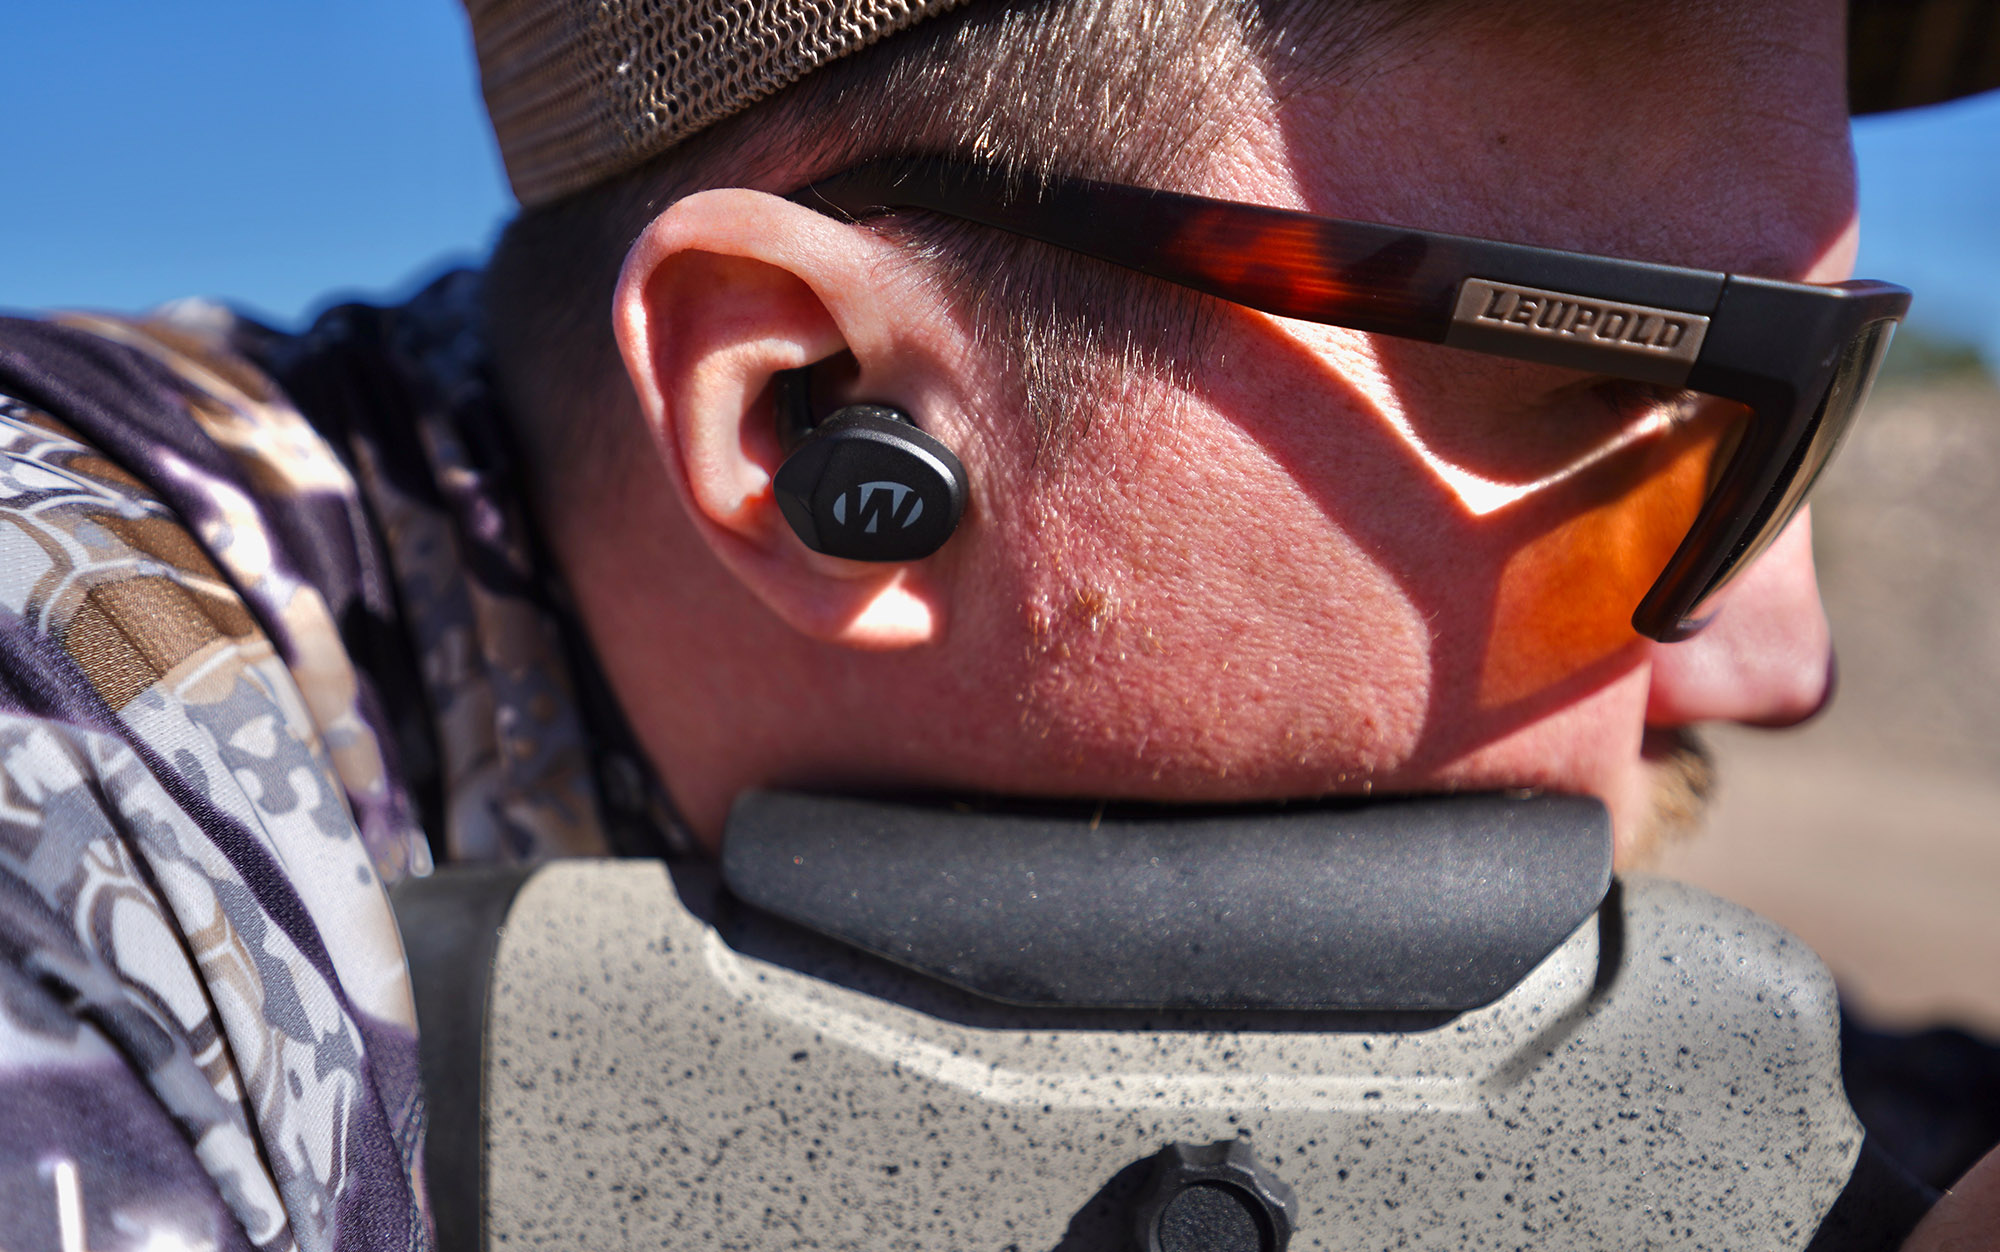 Tyler Freel was able to listen to safely music on the range with the Walkerâs Silencer BT 2.0.